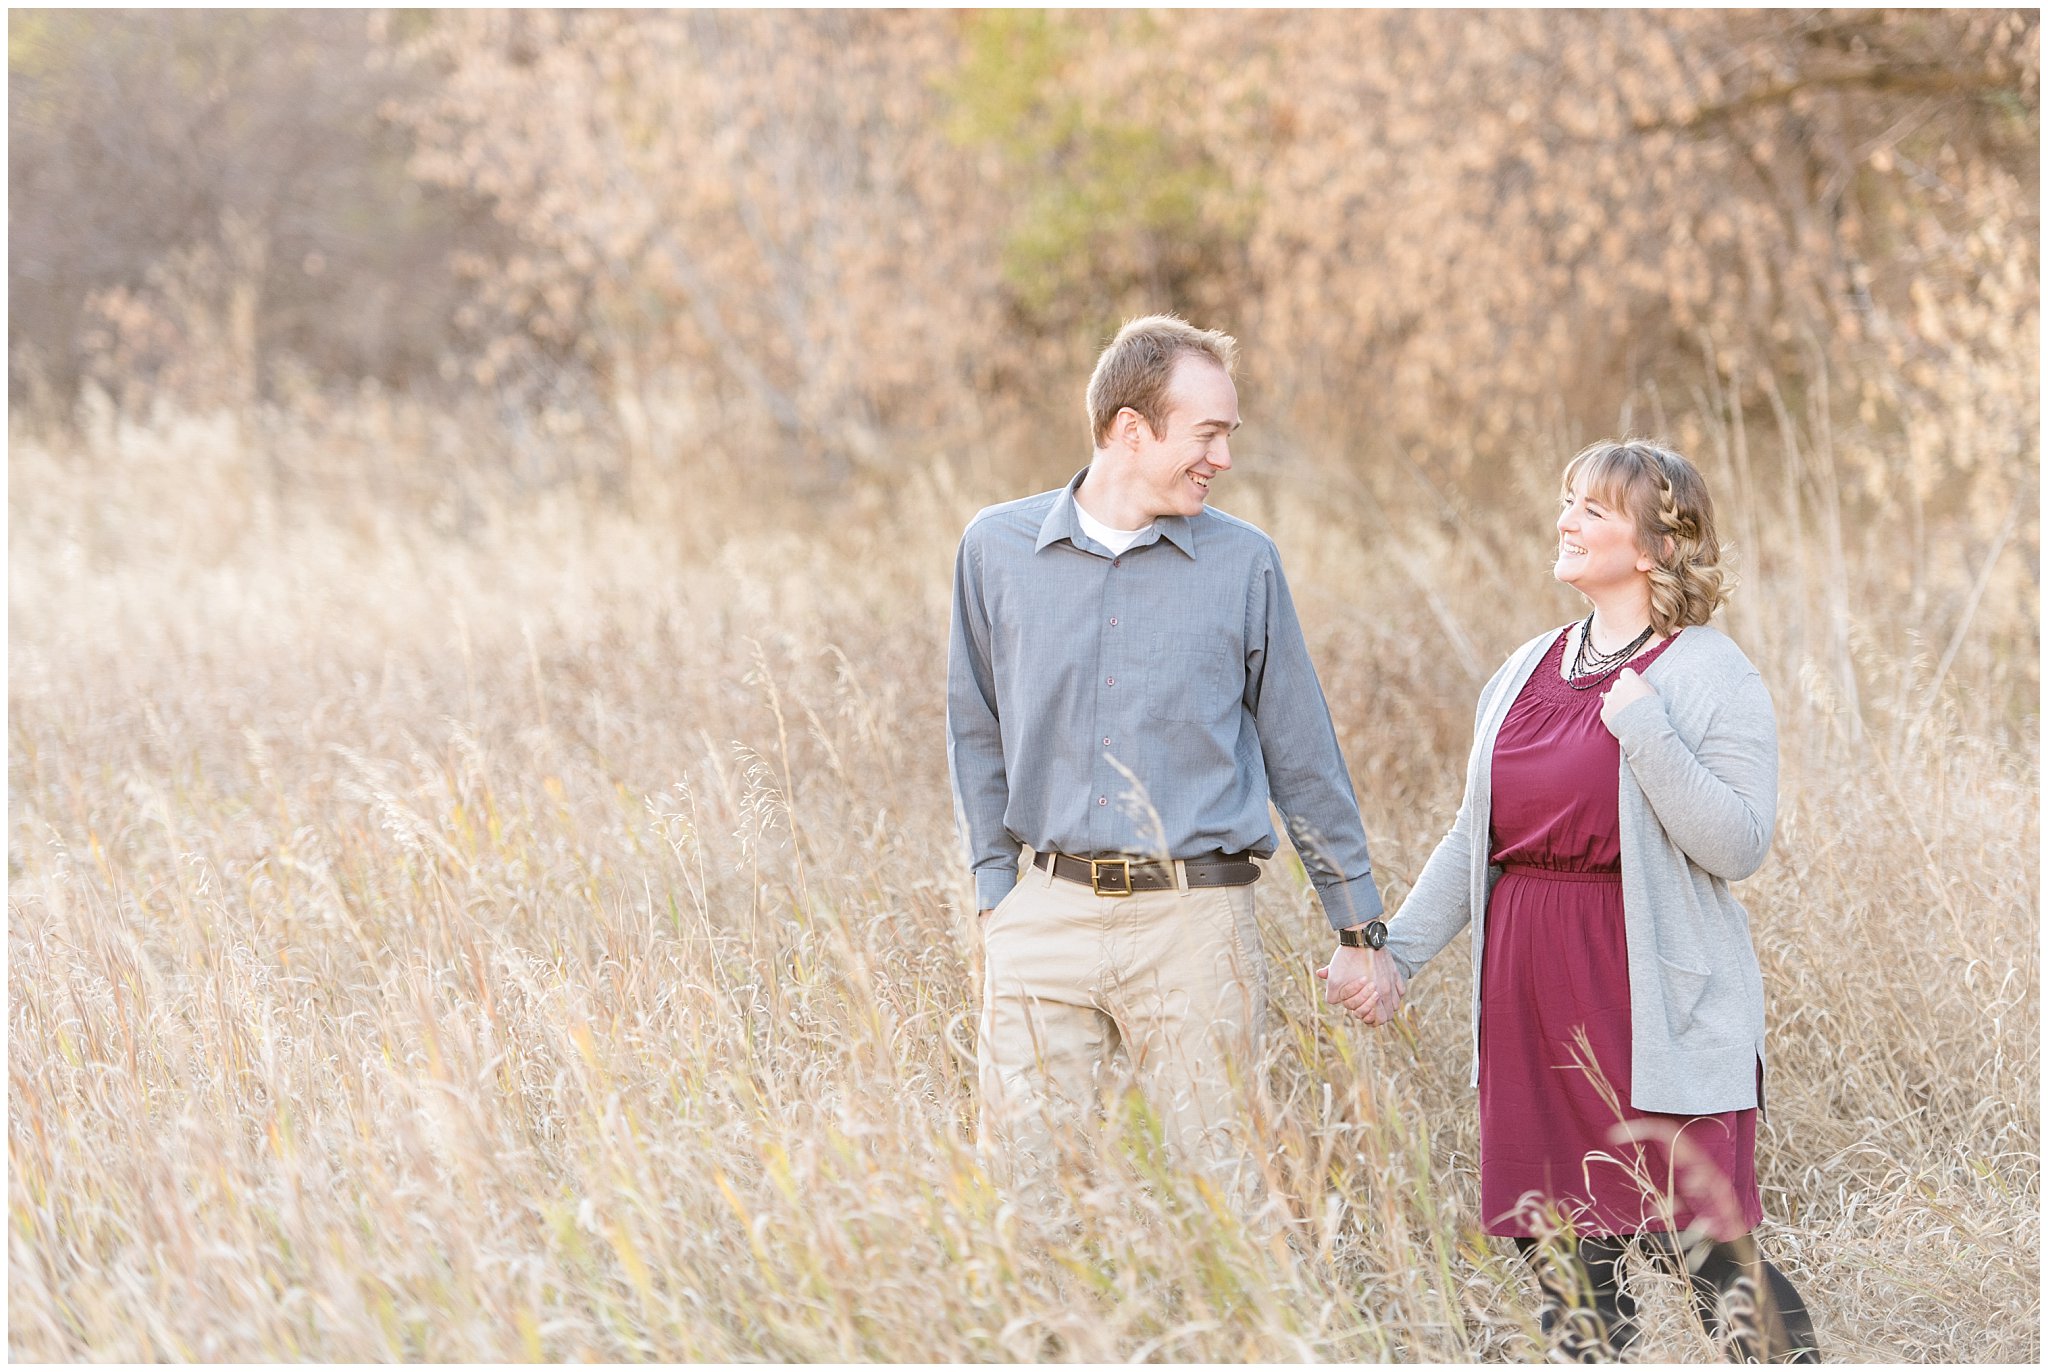 Couple walking and laughing in a field | Davis County Fall Engagement | Utah Wedding Photographers | Jessie and Dallin